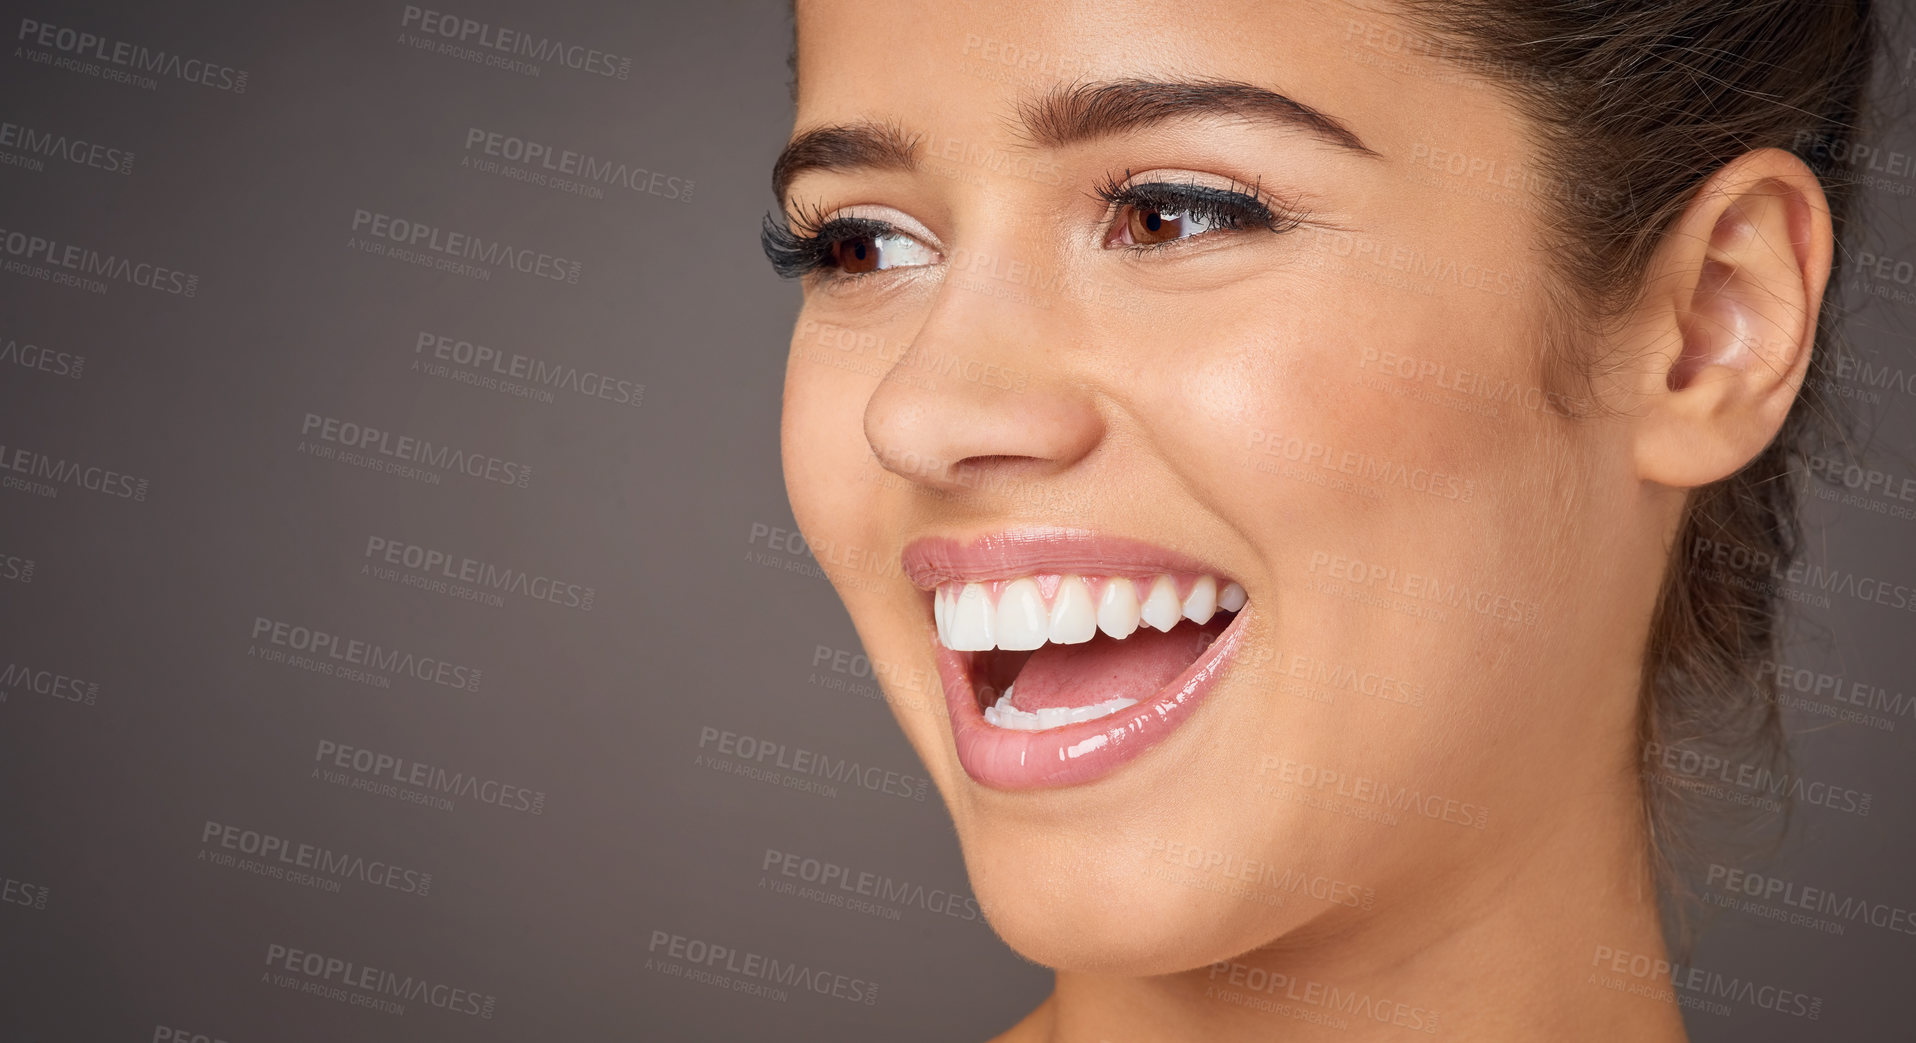 Buy stock photo Studio shot of a beautiful young woman with flawless skin posing against a gray background